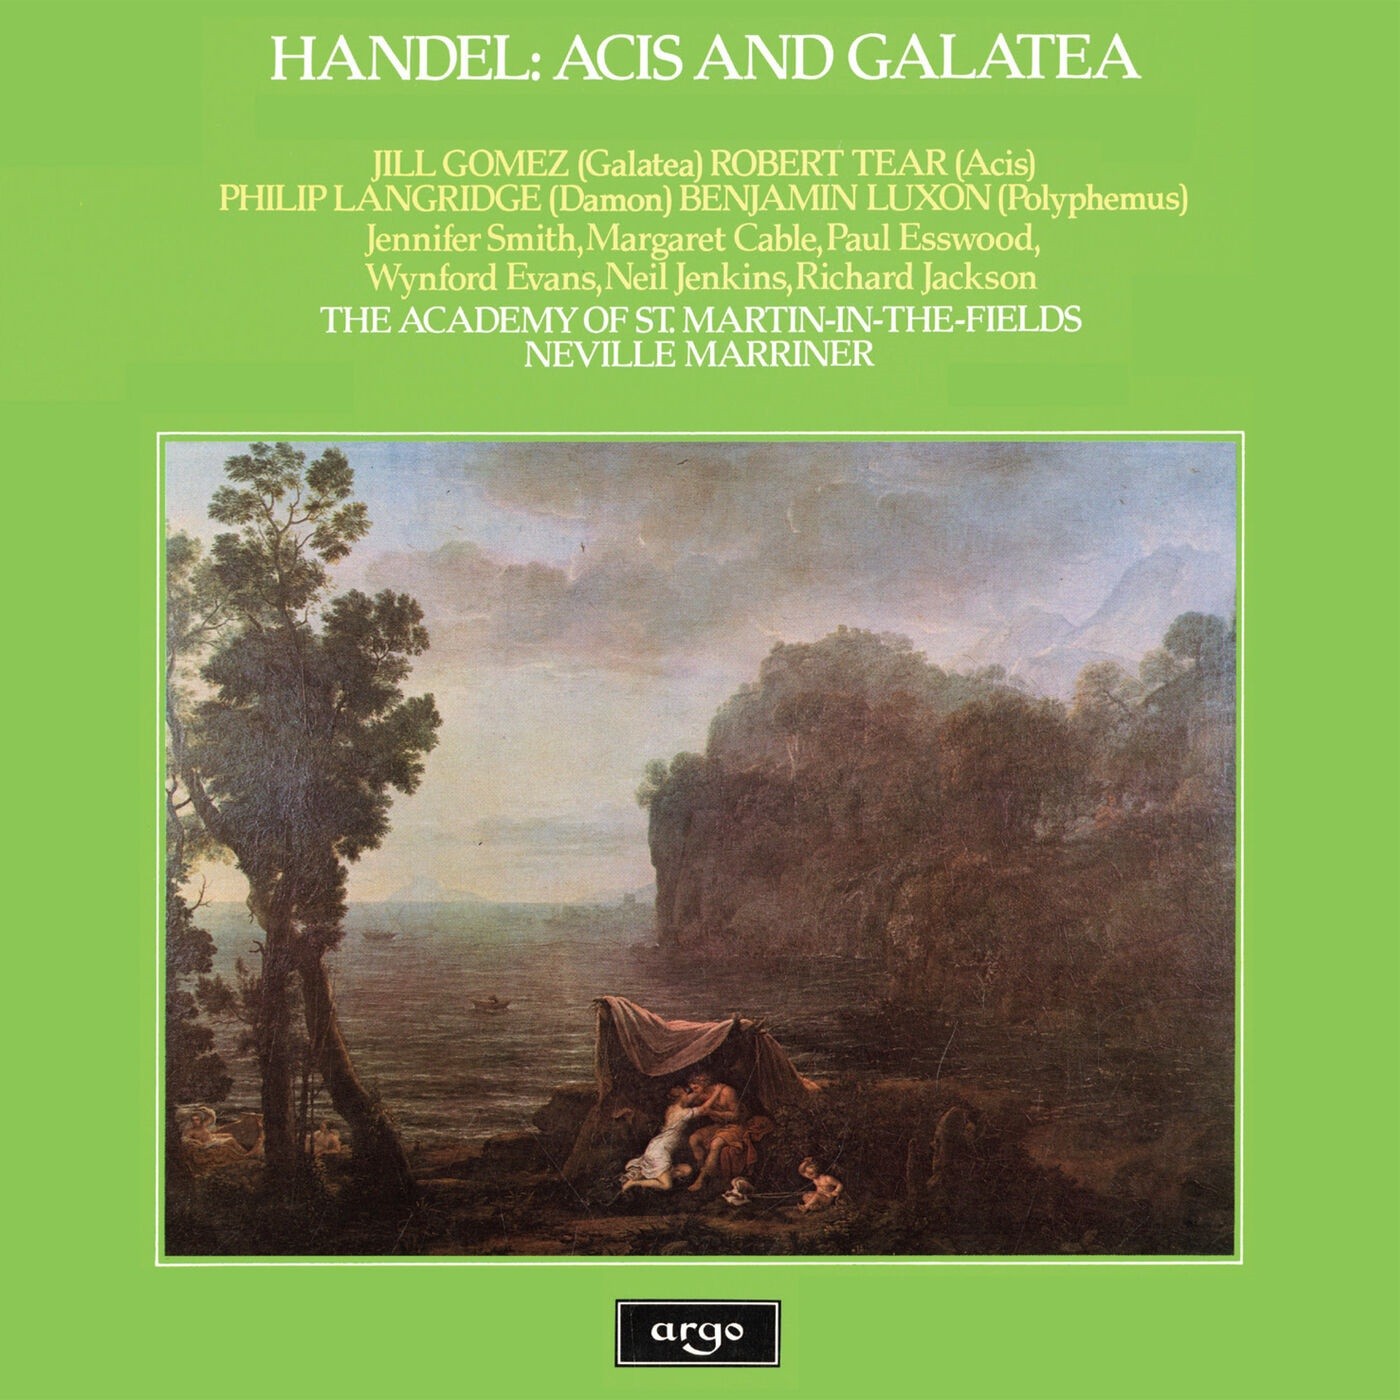 Academy of St. Martin in the Fields, Sir Neville Marriner - Handel: Acis and Galatea (1978/2024) [FLAC 24bit/48kHz] Download